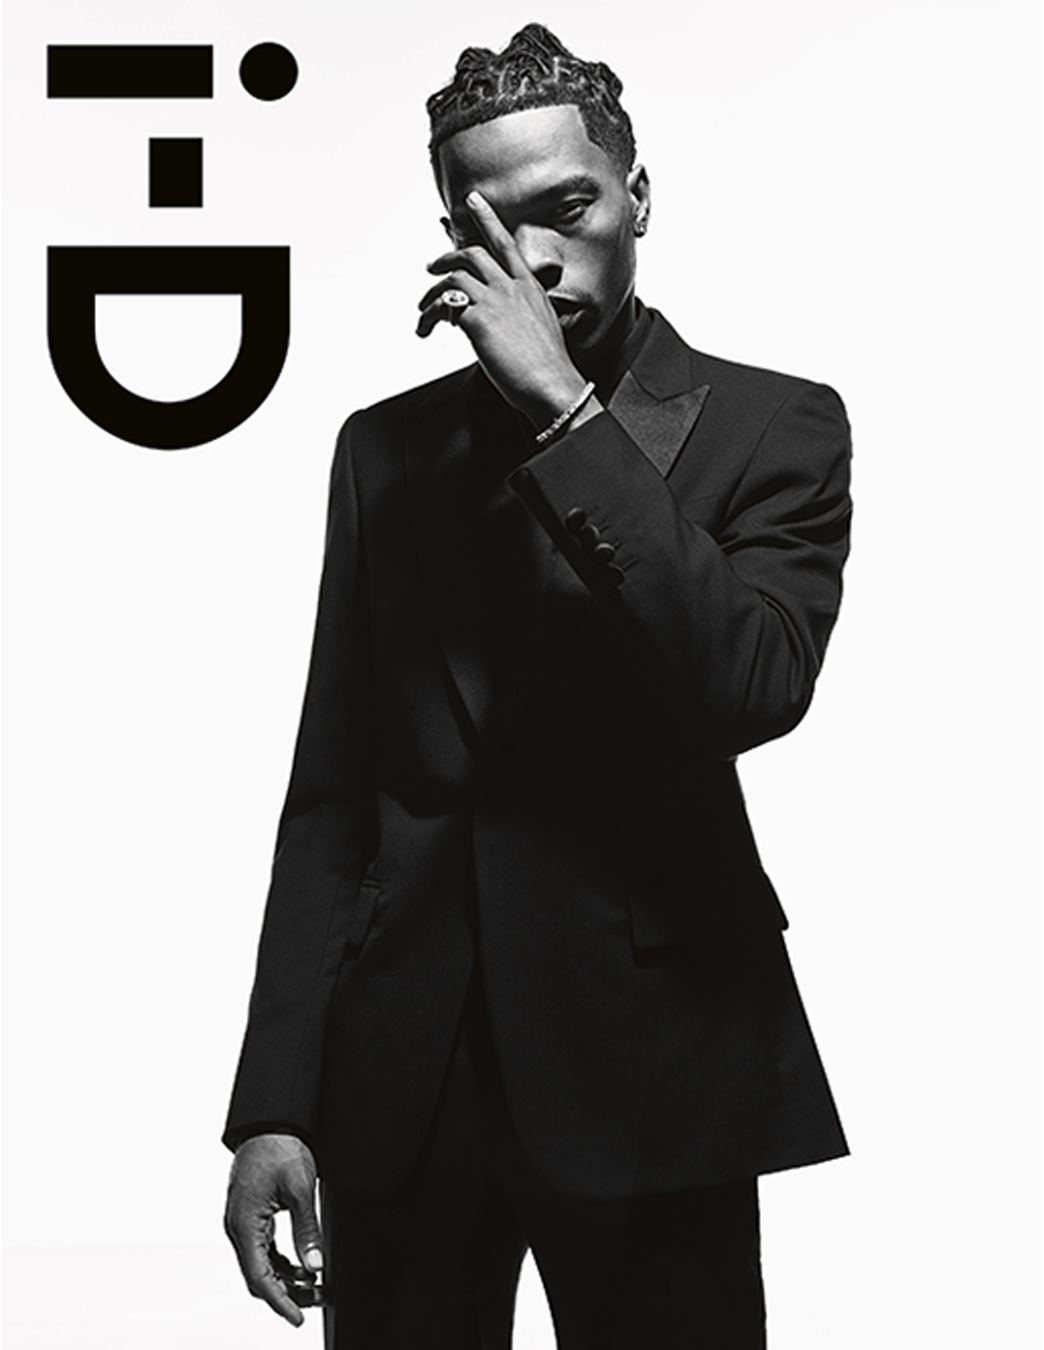 Lil Baby on the cover of i-D, wearing a black suit